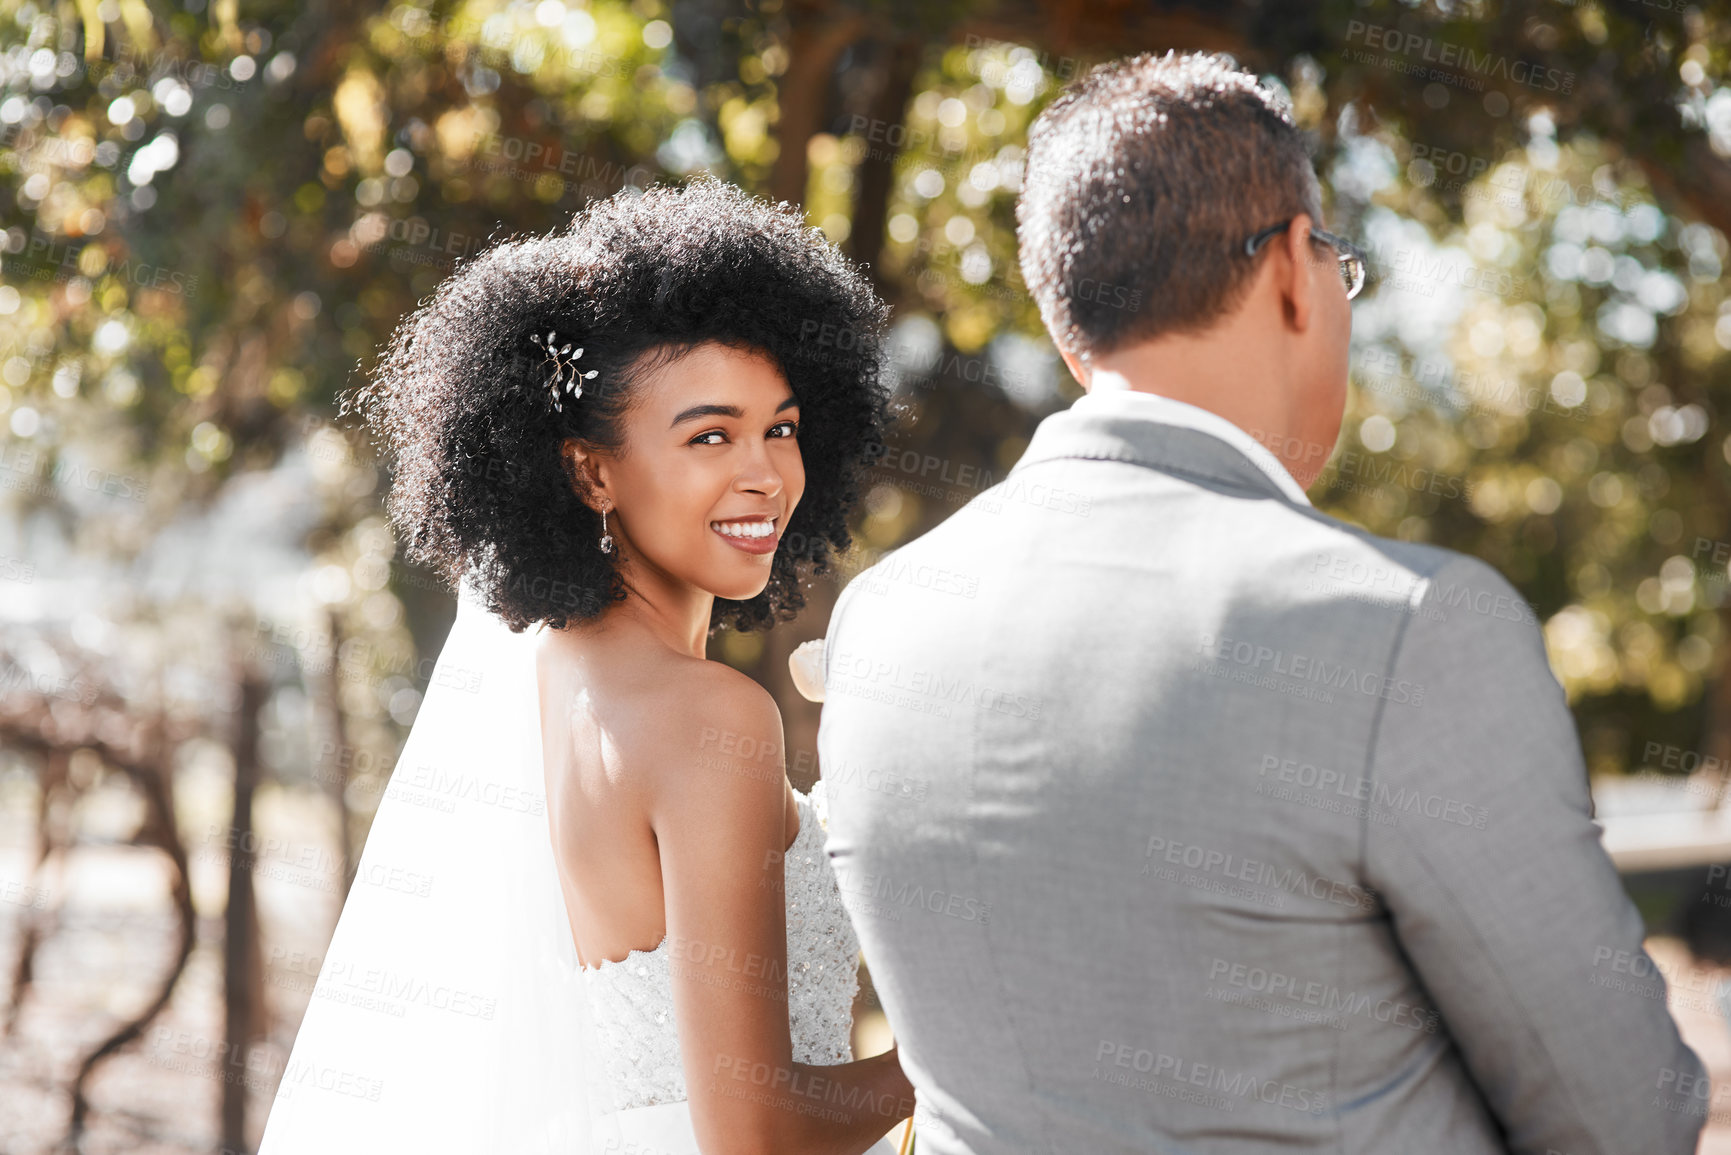 Buy stock photo Portrait of a happy young bride getting walk down the aisle by her father on her wedding day